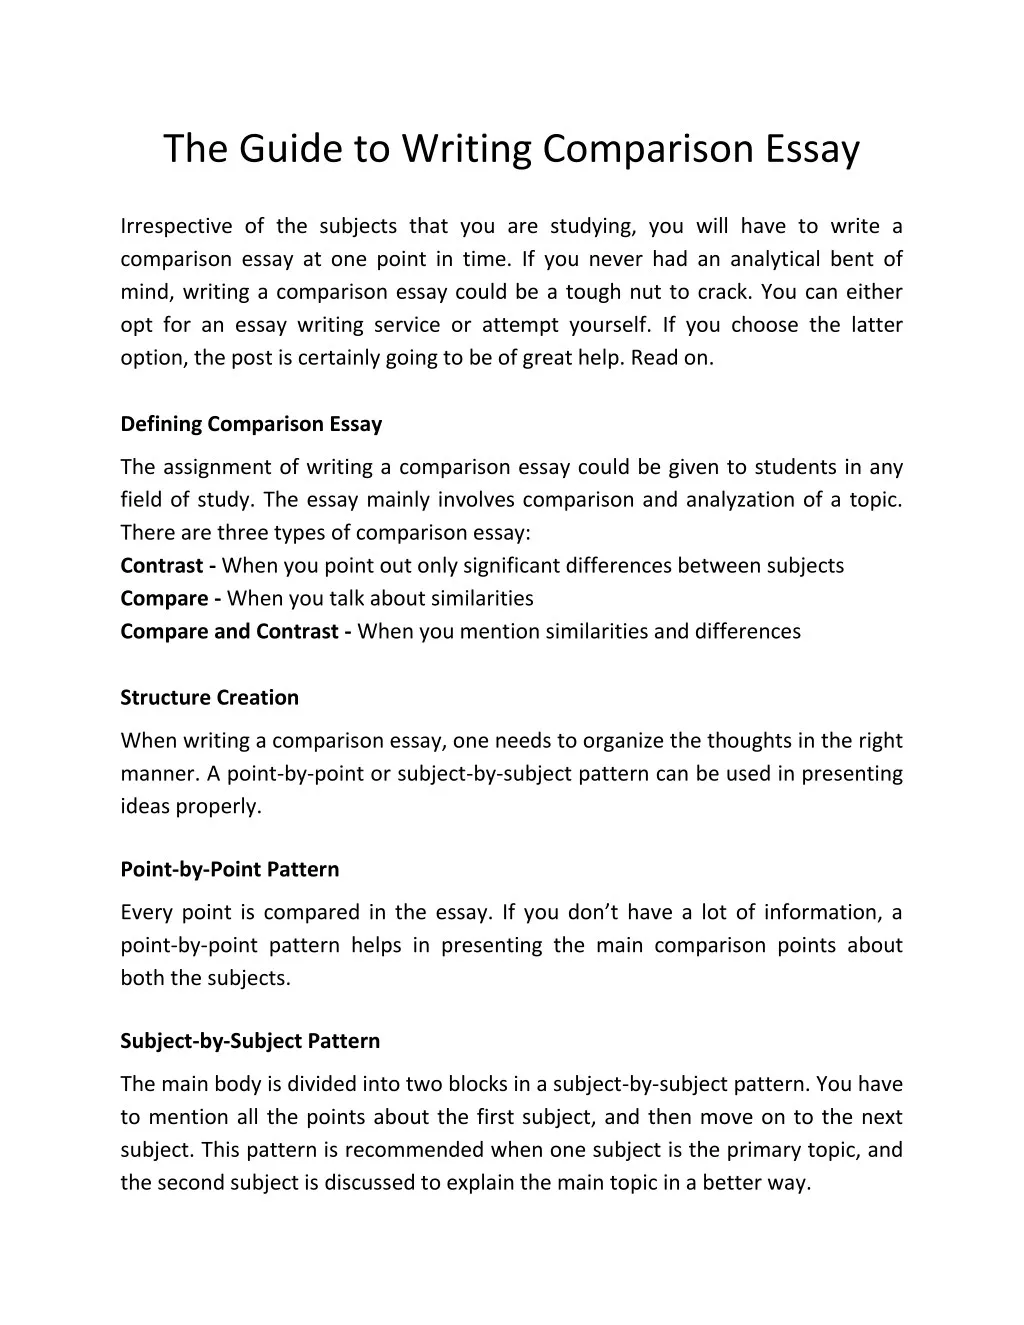 the guide to writing comparison essay